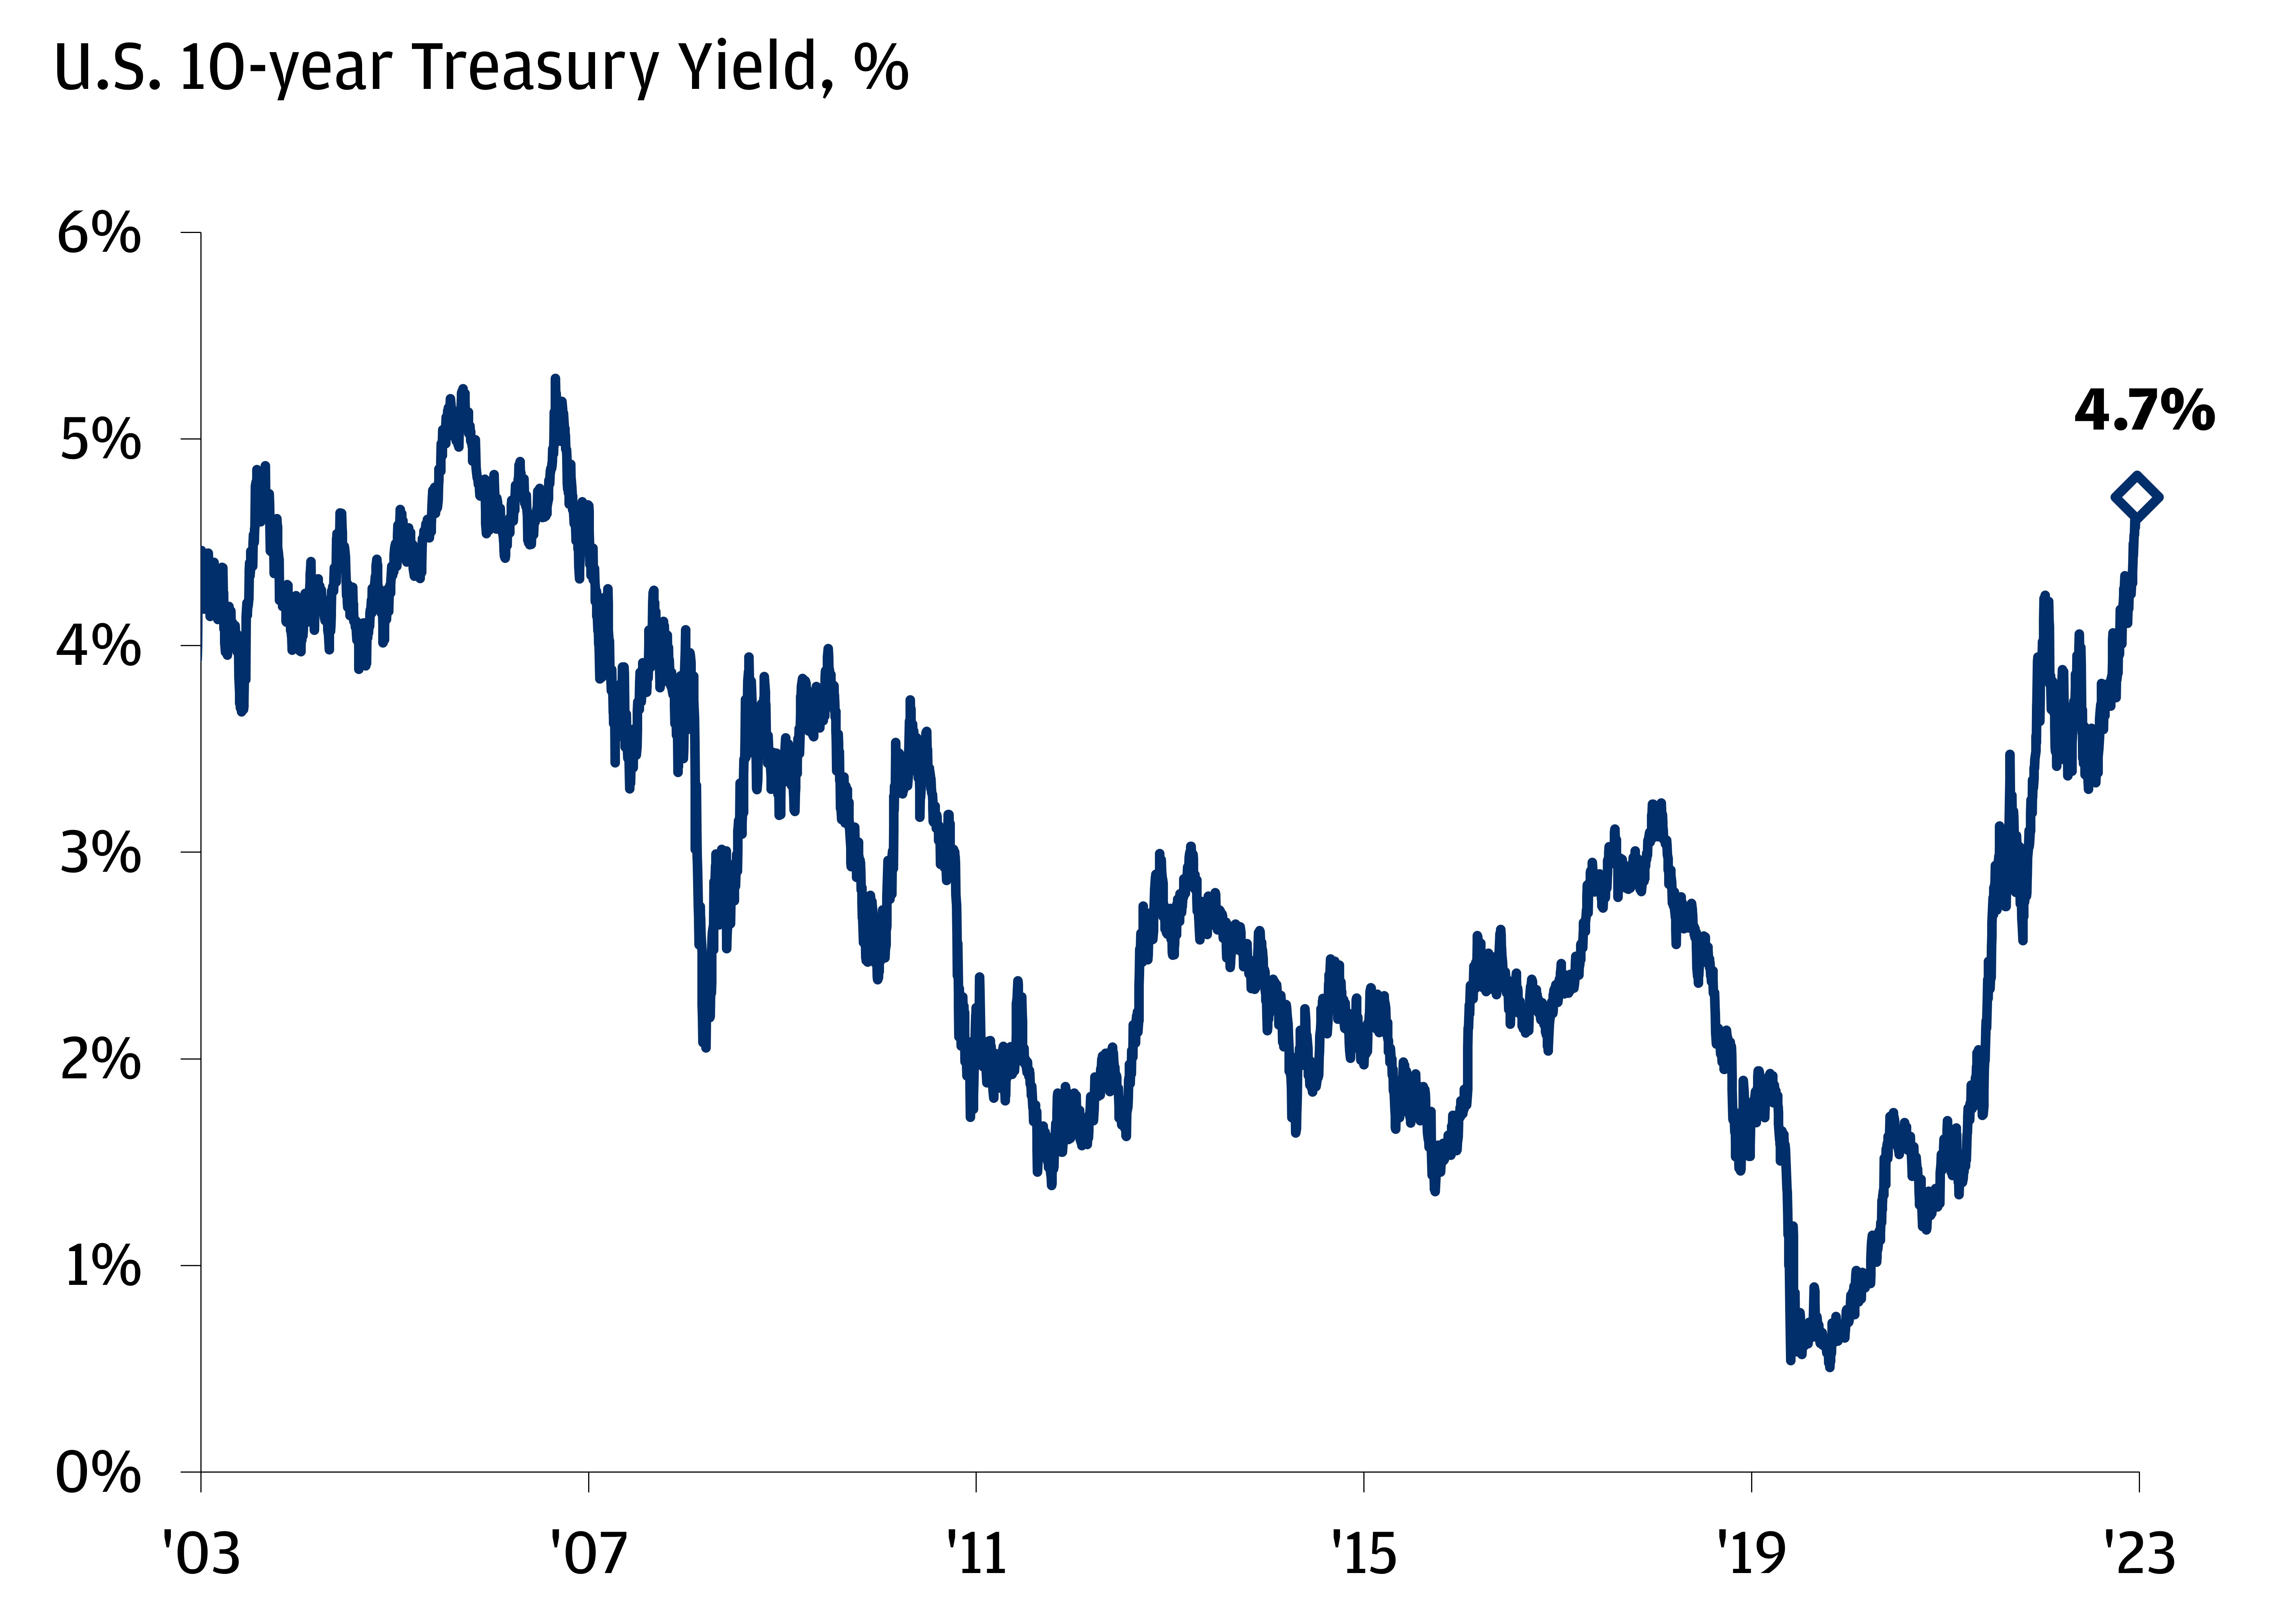 This chart shows the U.S 10-year Treasury yield from 2020 to 2023.